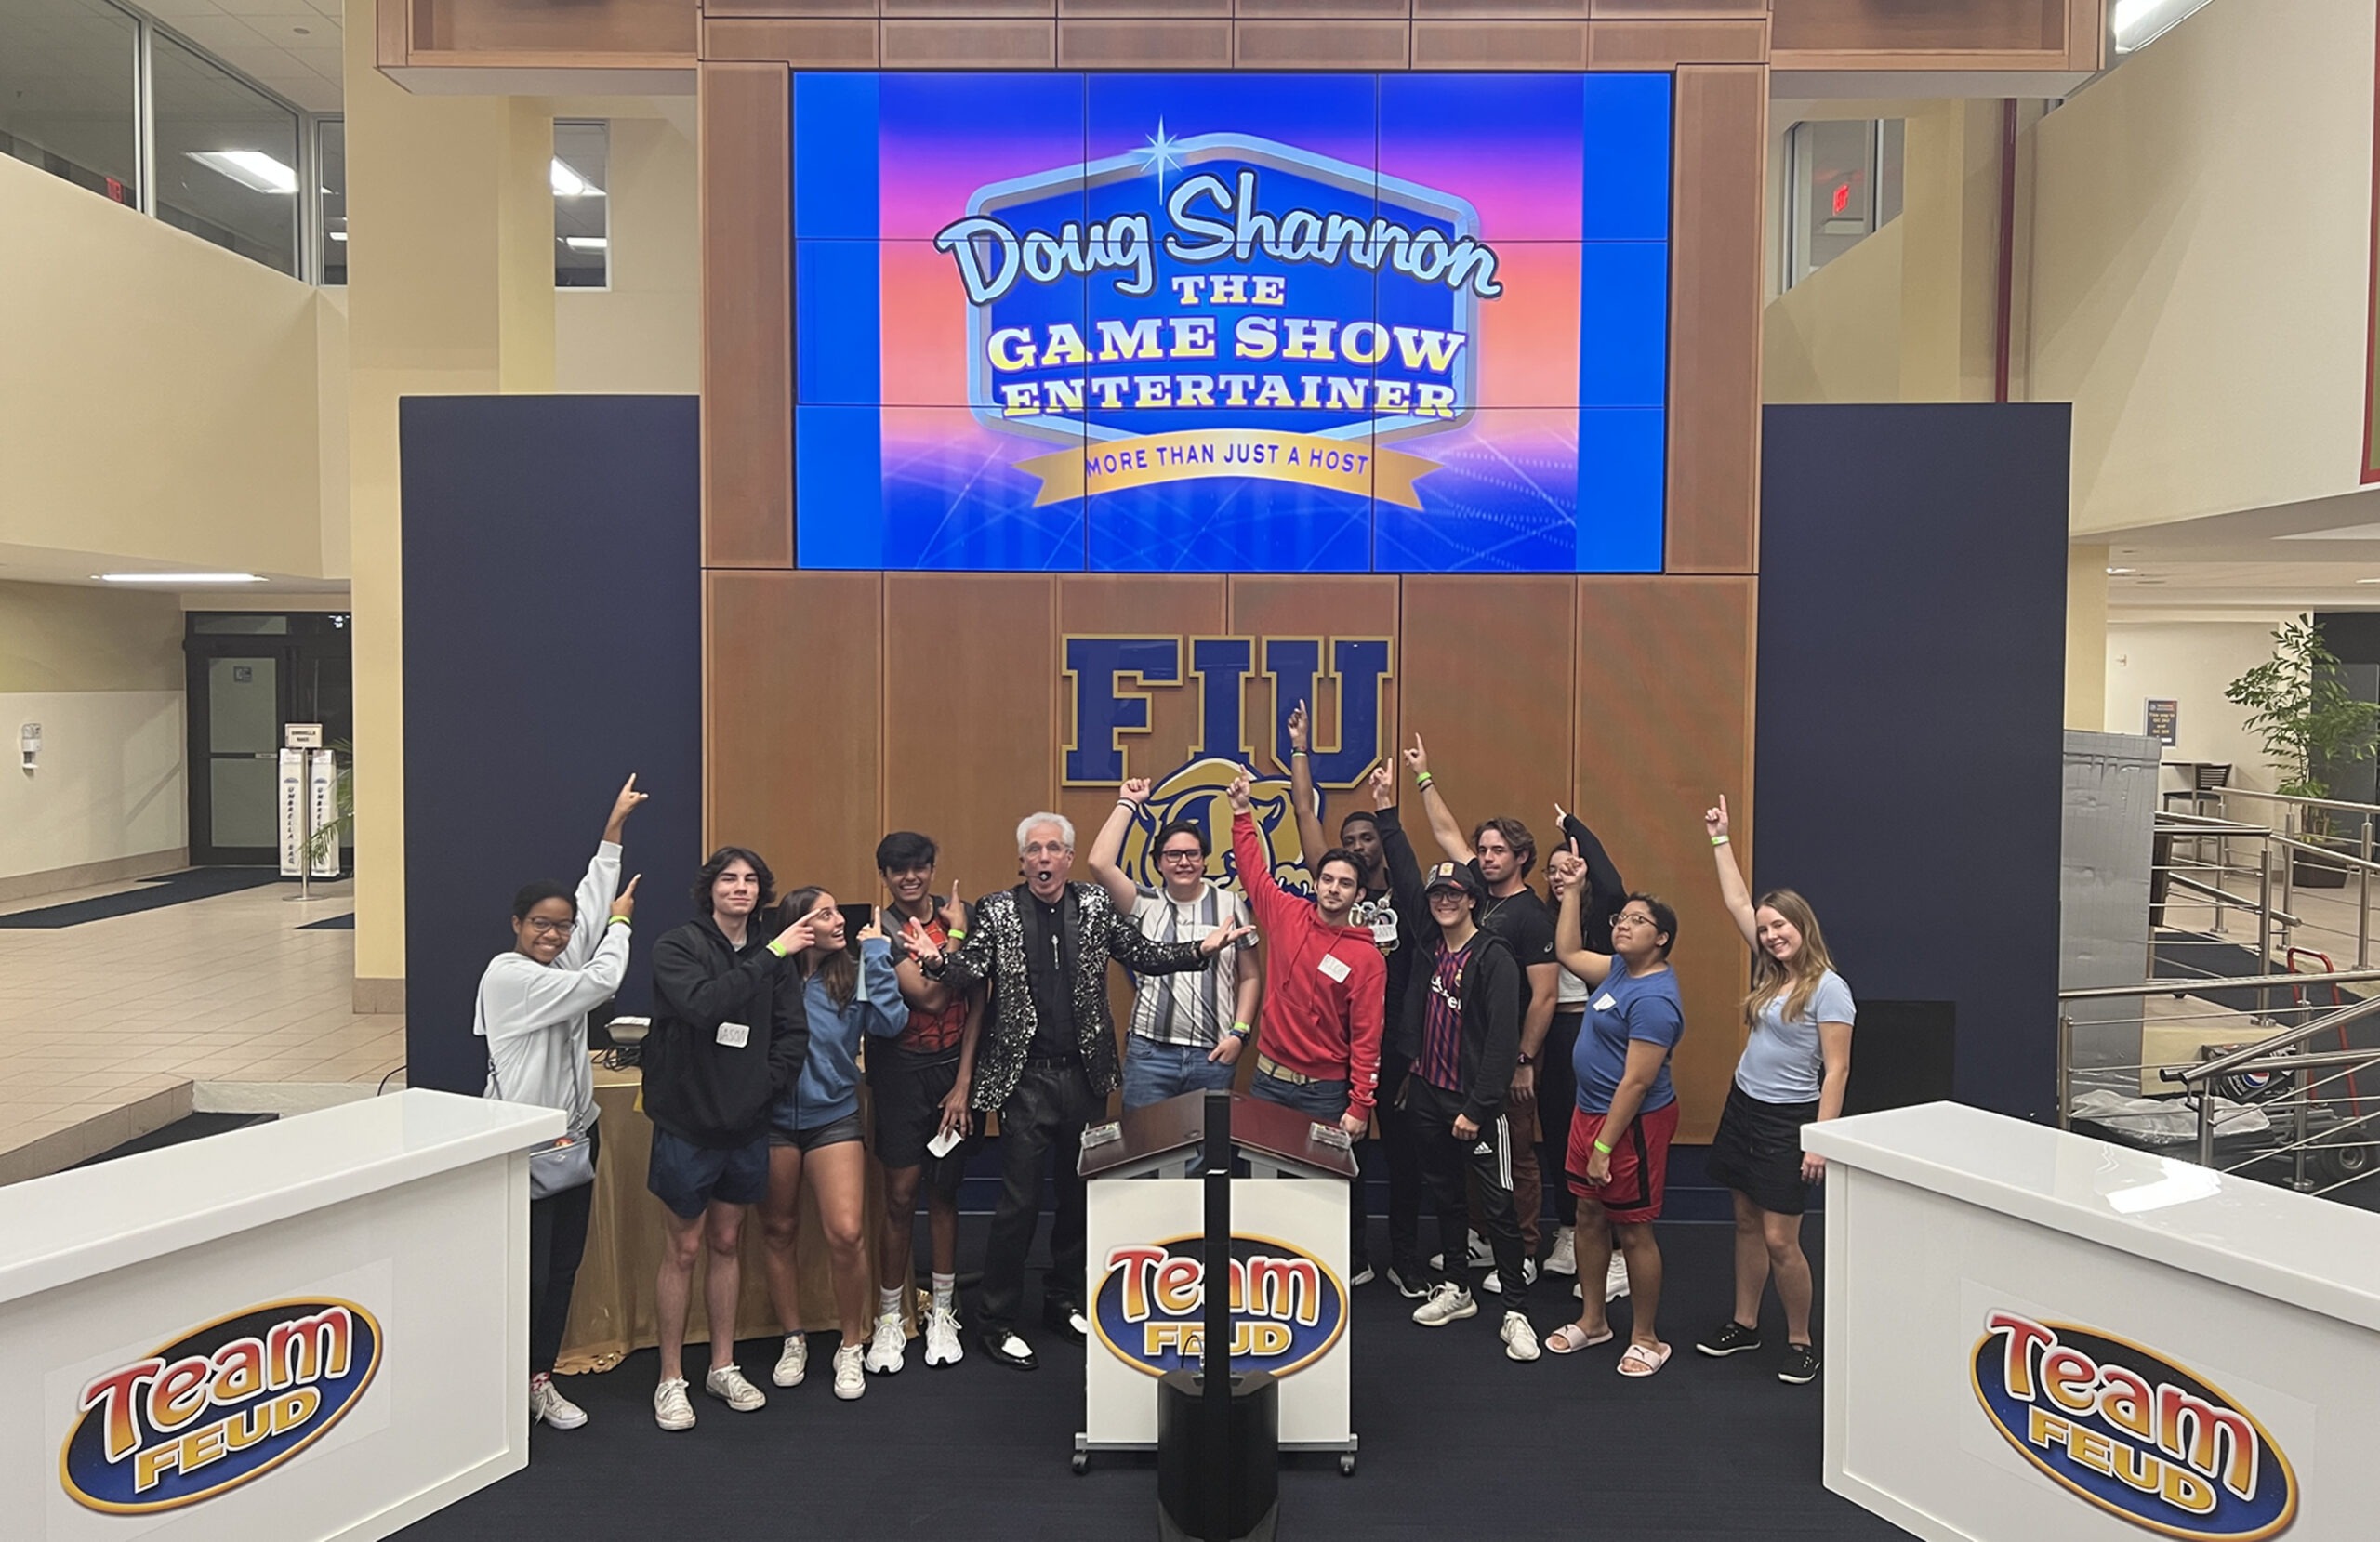 Doug presenting 2 Team Feud to students at FIU